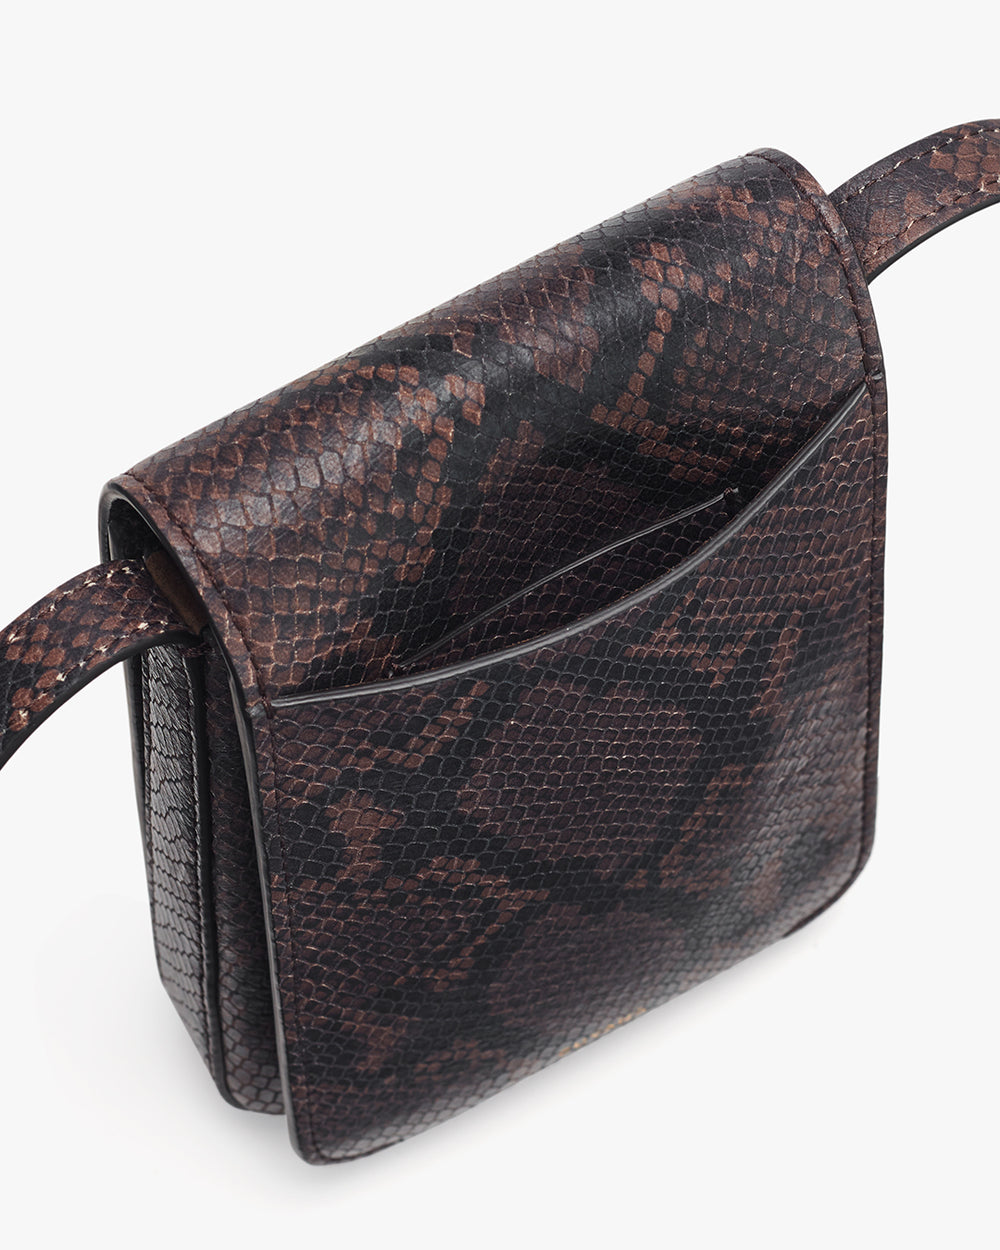 Small textured shoulder bag with a flap closure